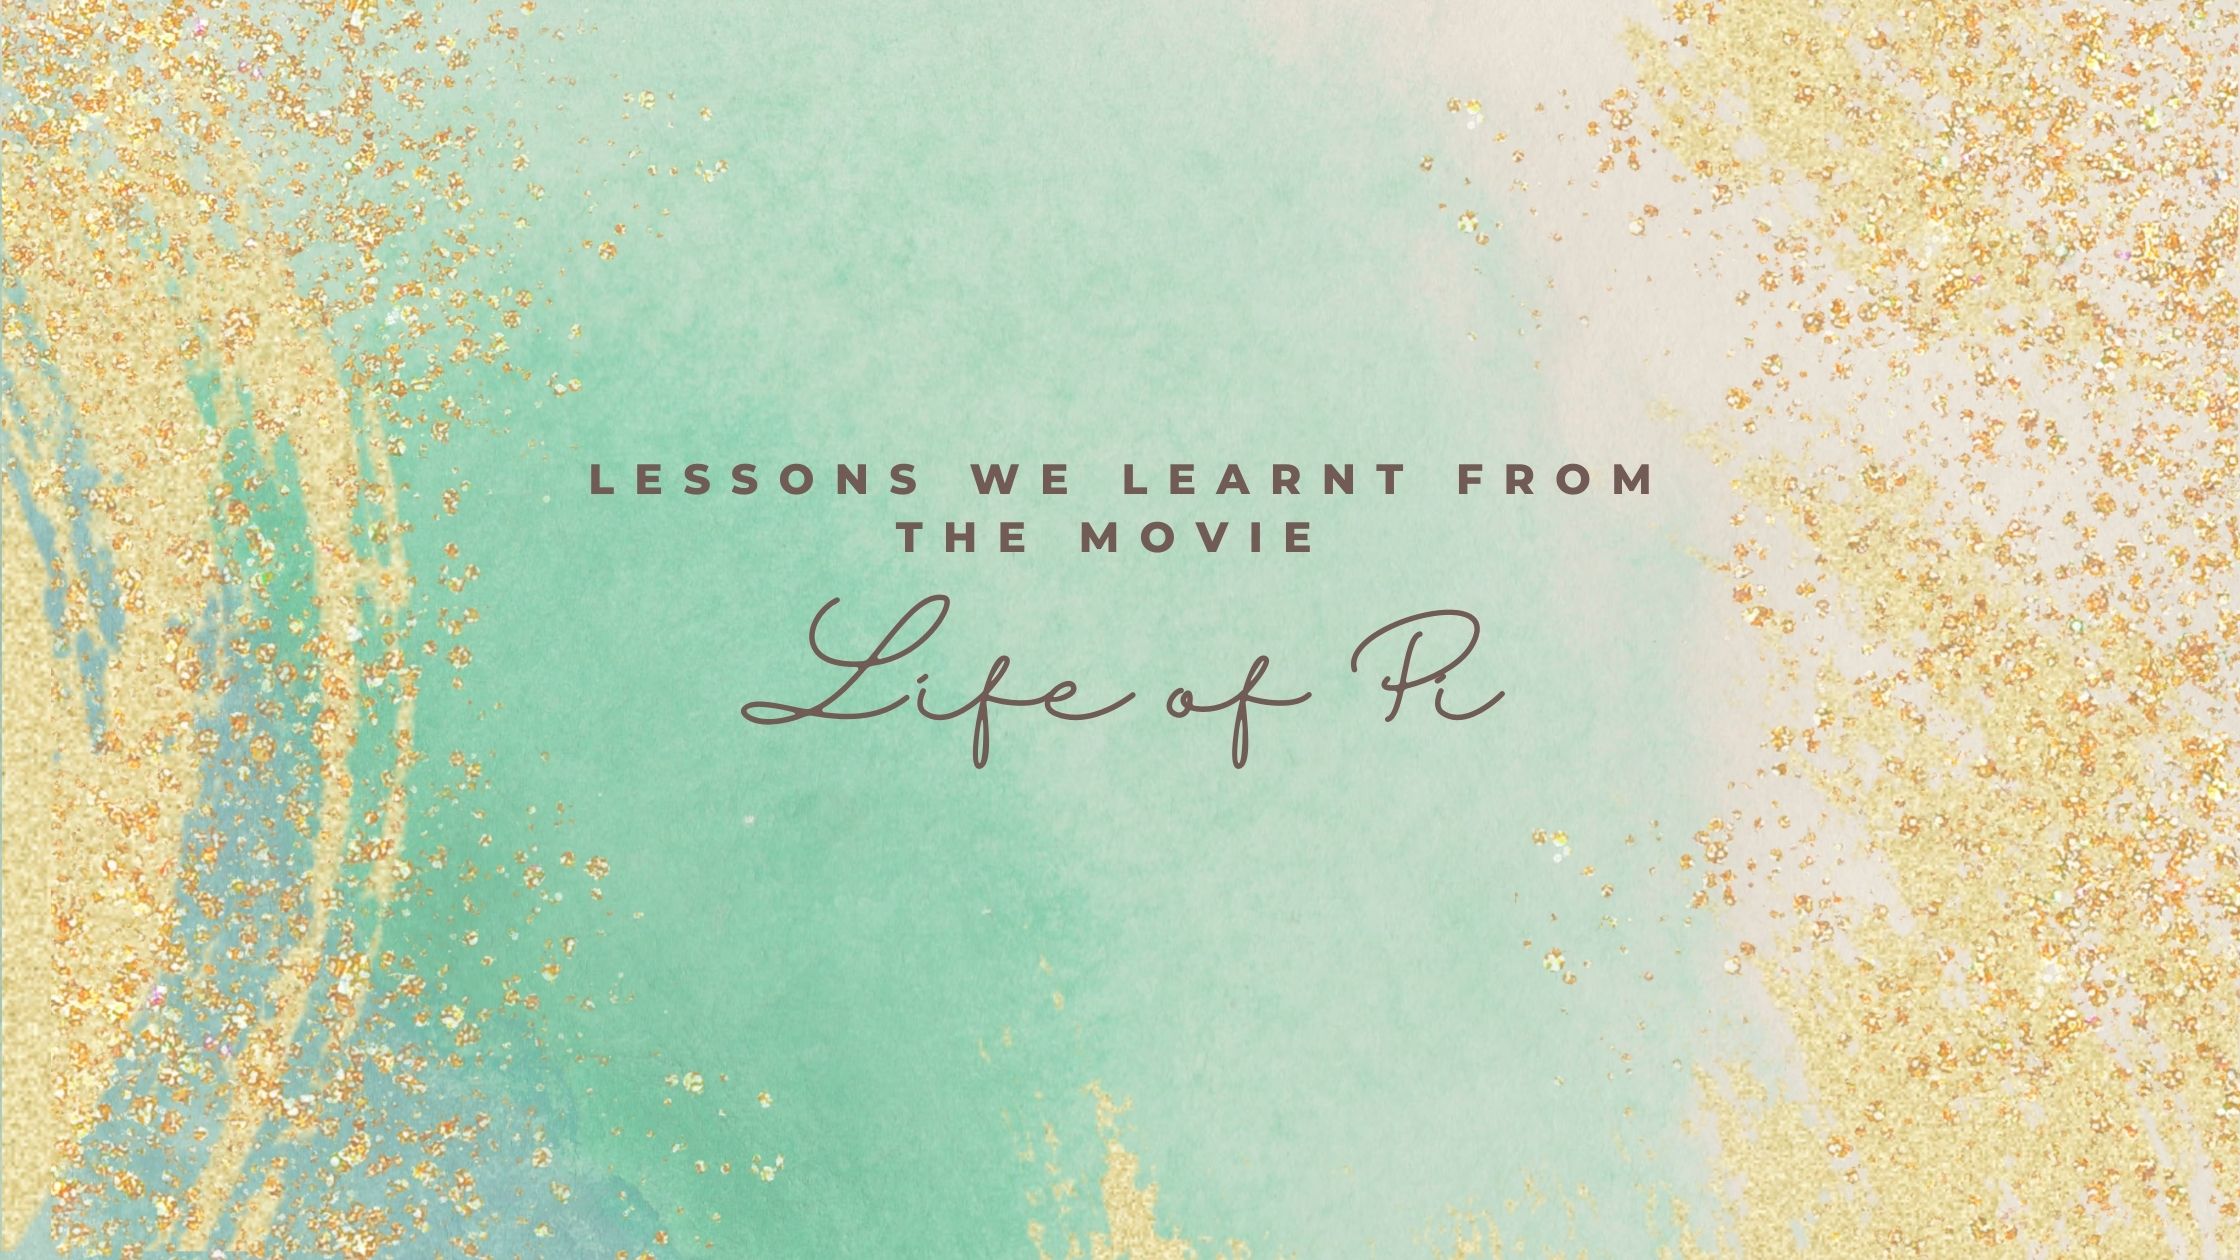 Lessons we learnt from the movie ‘Life of Pi’